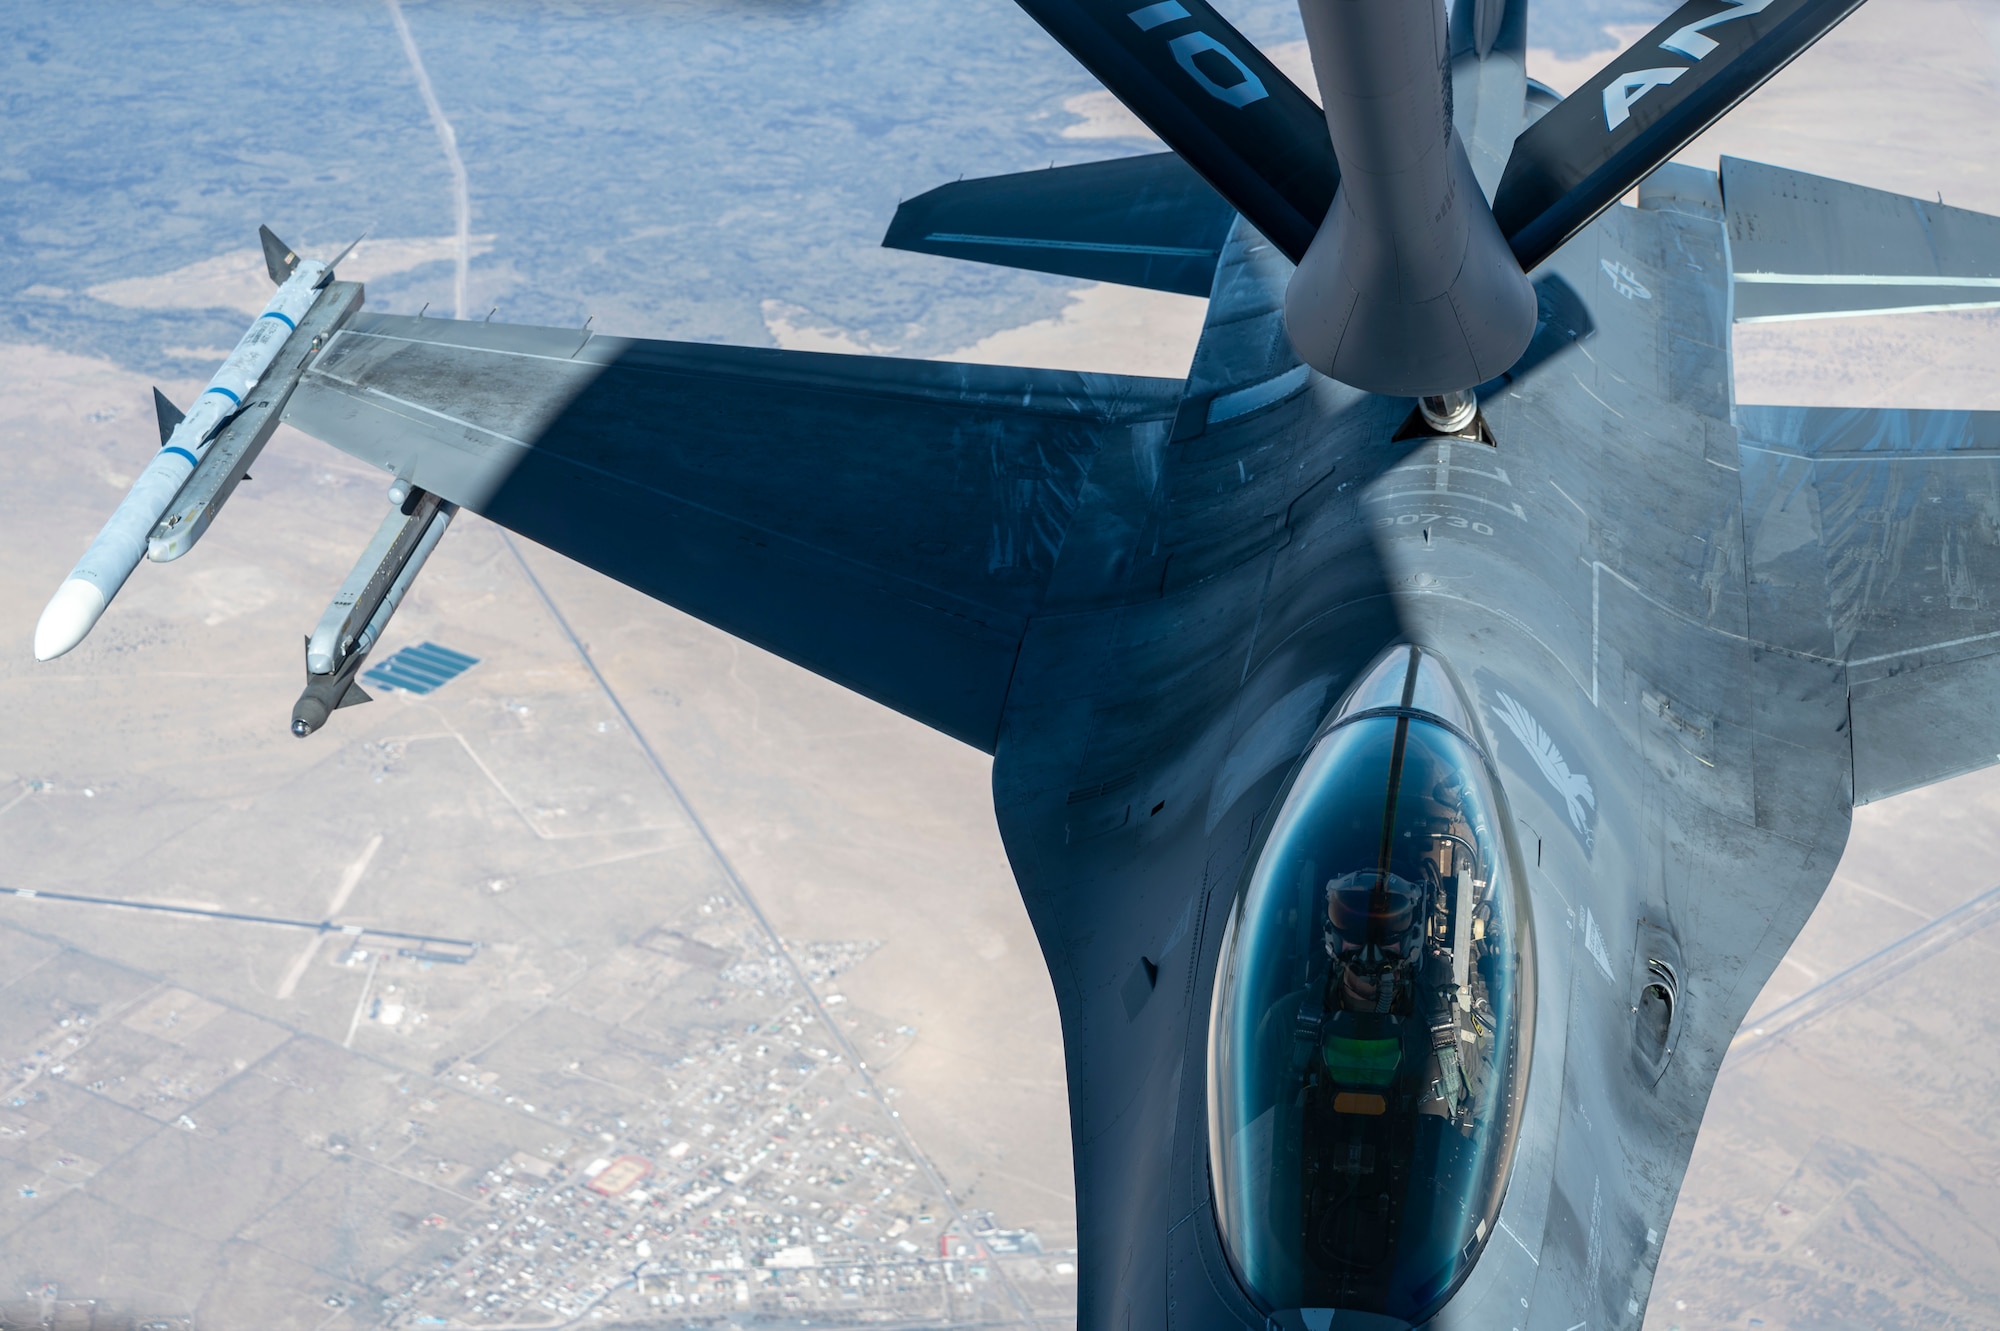 An F-16 Viper from the 314th Fighter Squadron at Holloman Air Force Base, New Mexico, is refueled by a KC-135 Stratotanker from the 121st Air Refueling Wing at Rickenbacker Air National Guard Base, Columbus, Ohio, over New Mexico, Nov. 15, 2022.